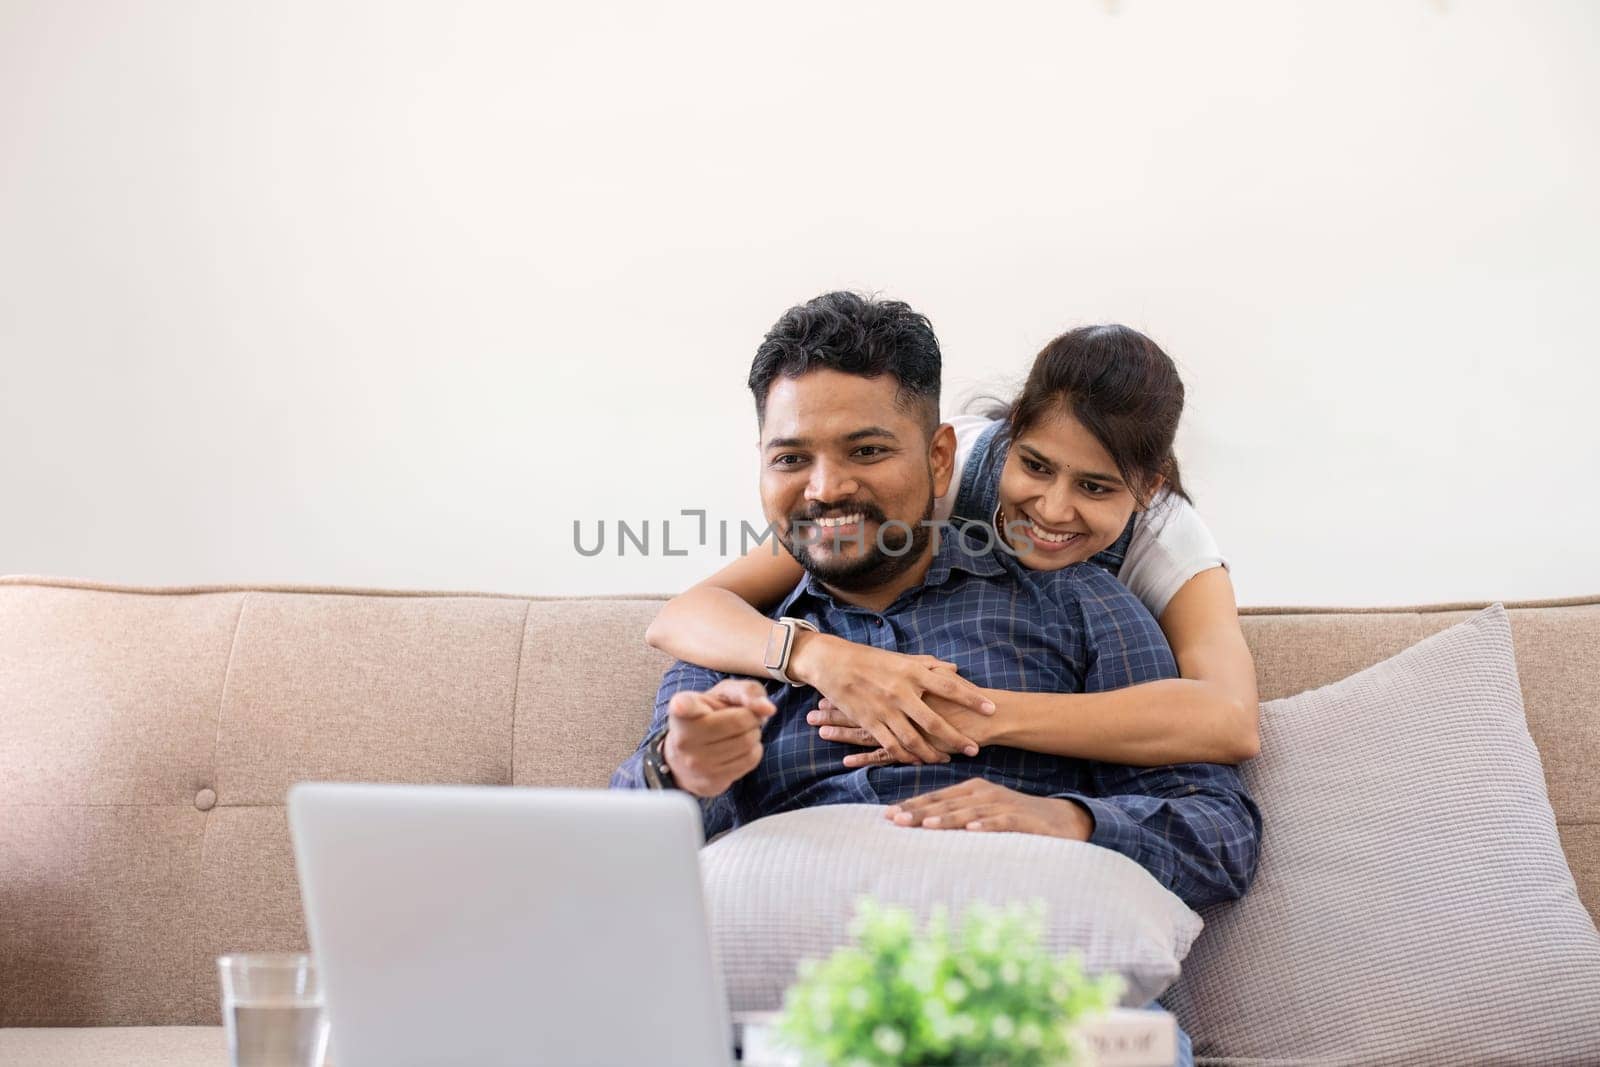 Cropped view of young woman hugging husband while using laptop on sofa in living room.